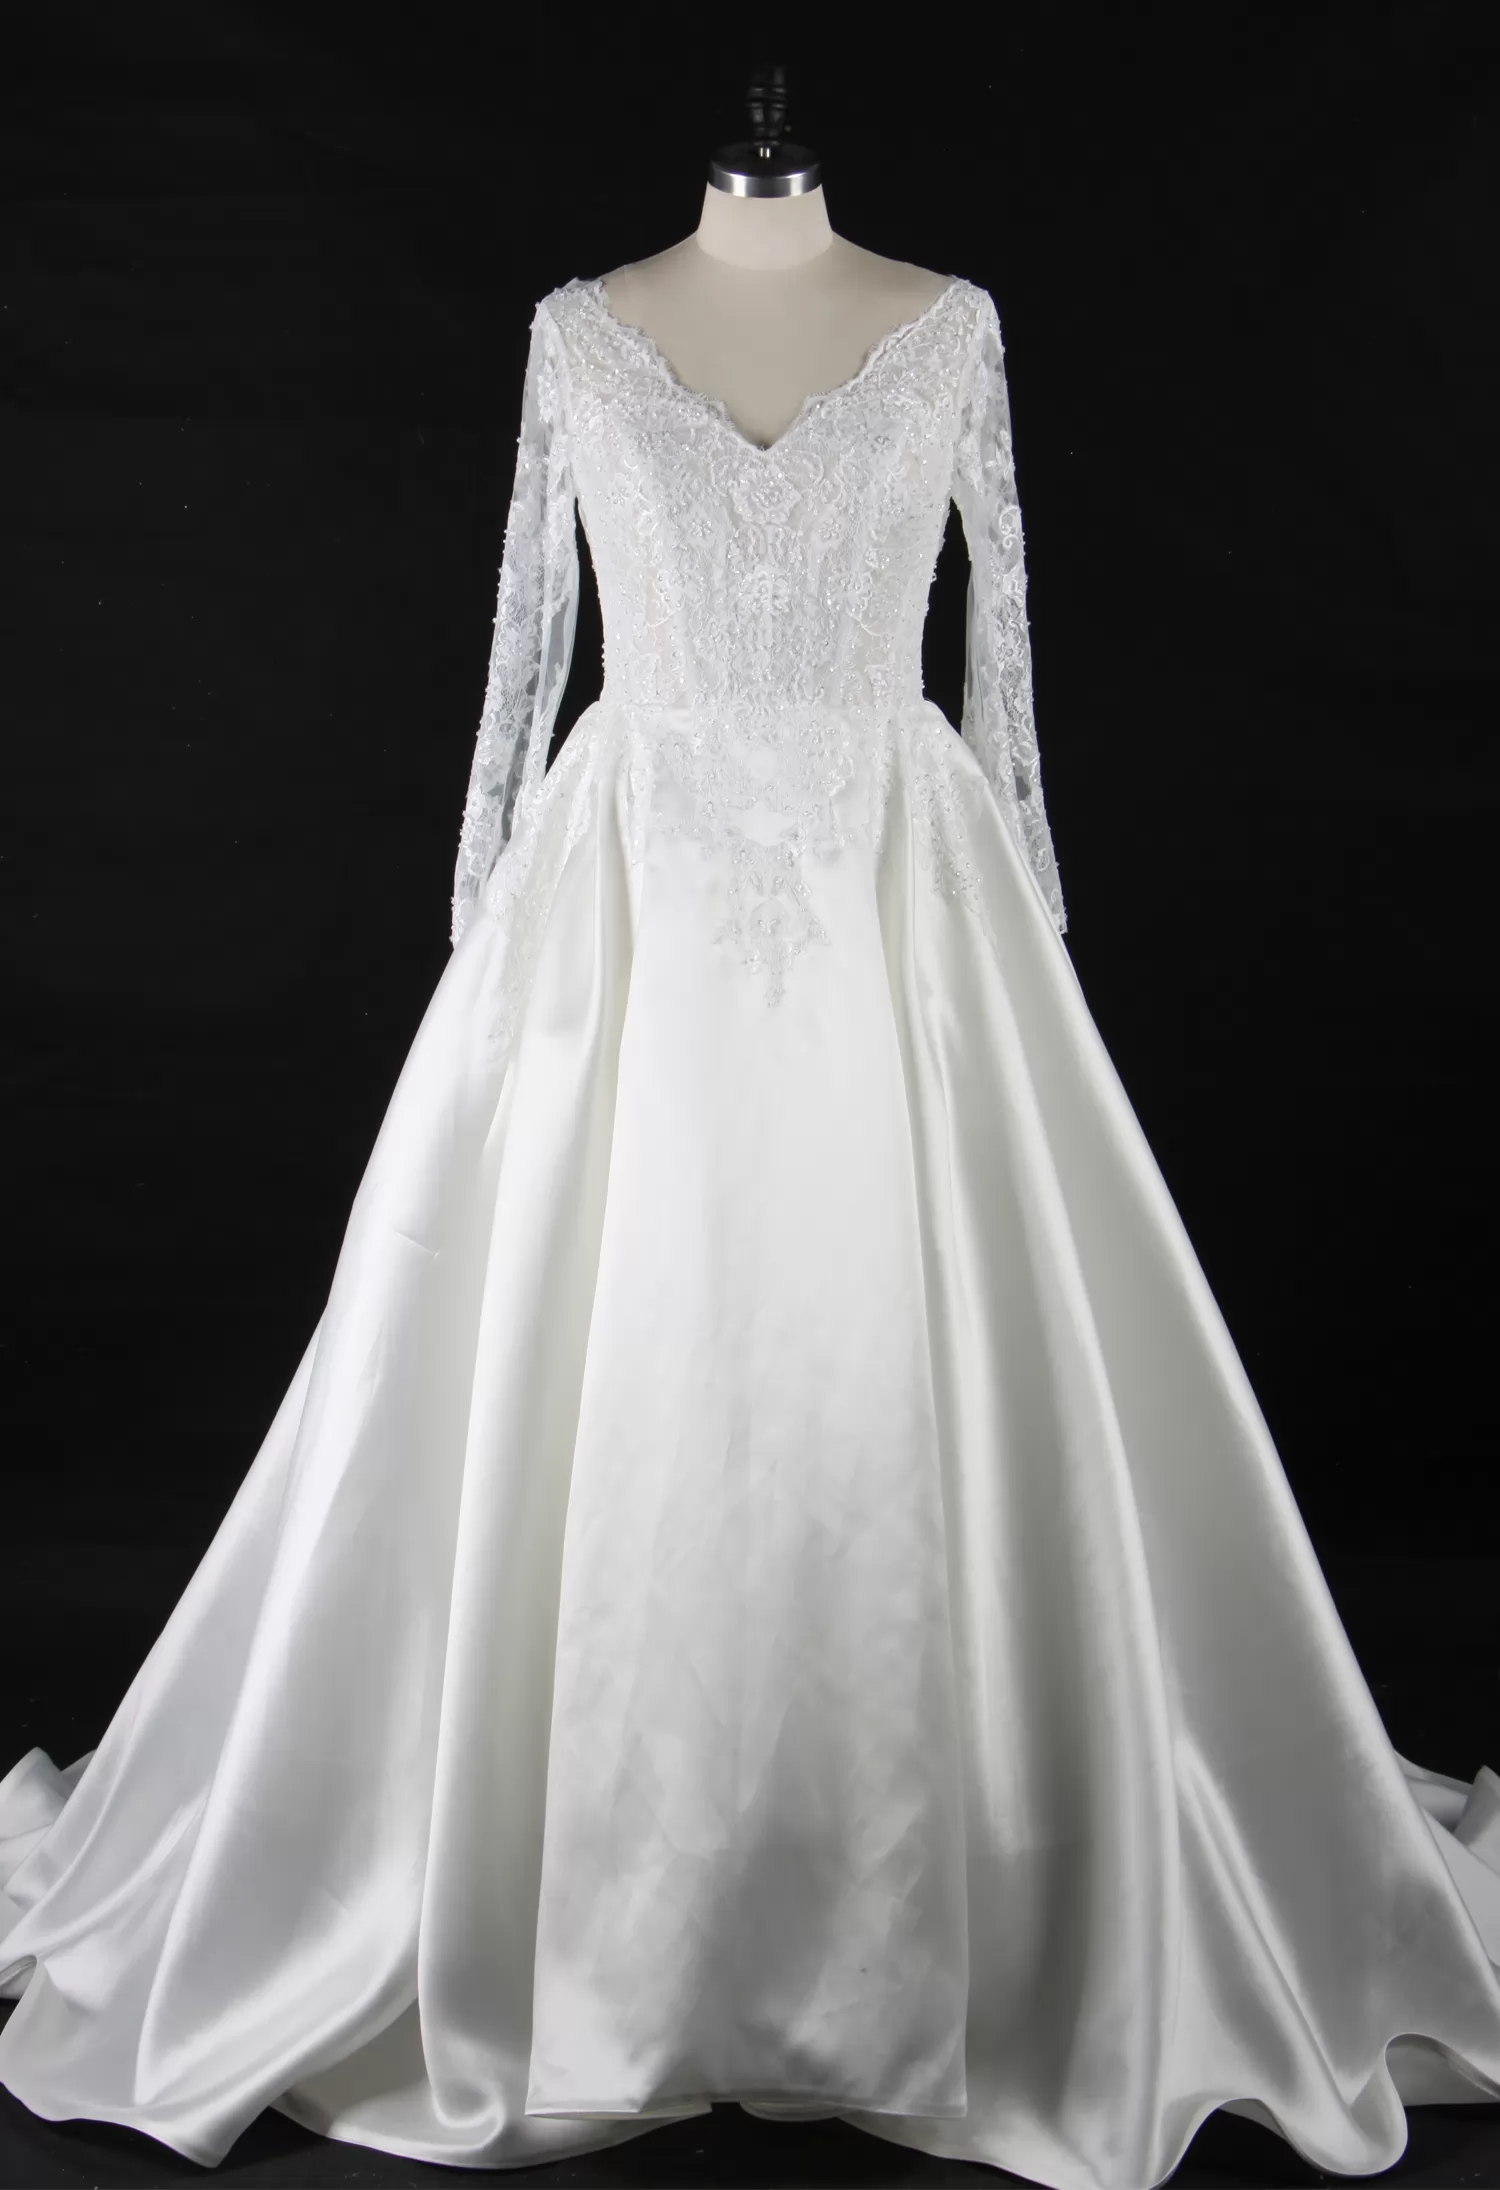 Elegant Long Sleeves Satin Wedding Gown With Lace Keyhole Back